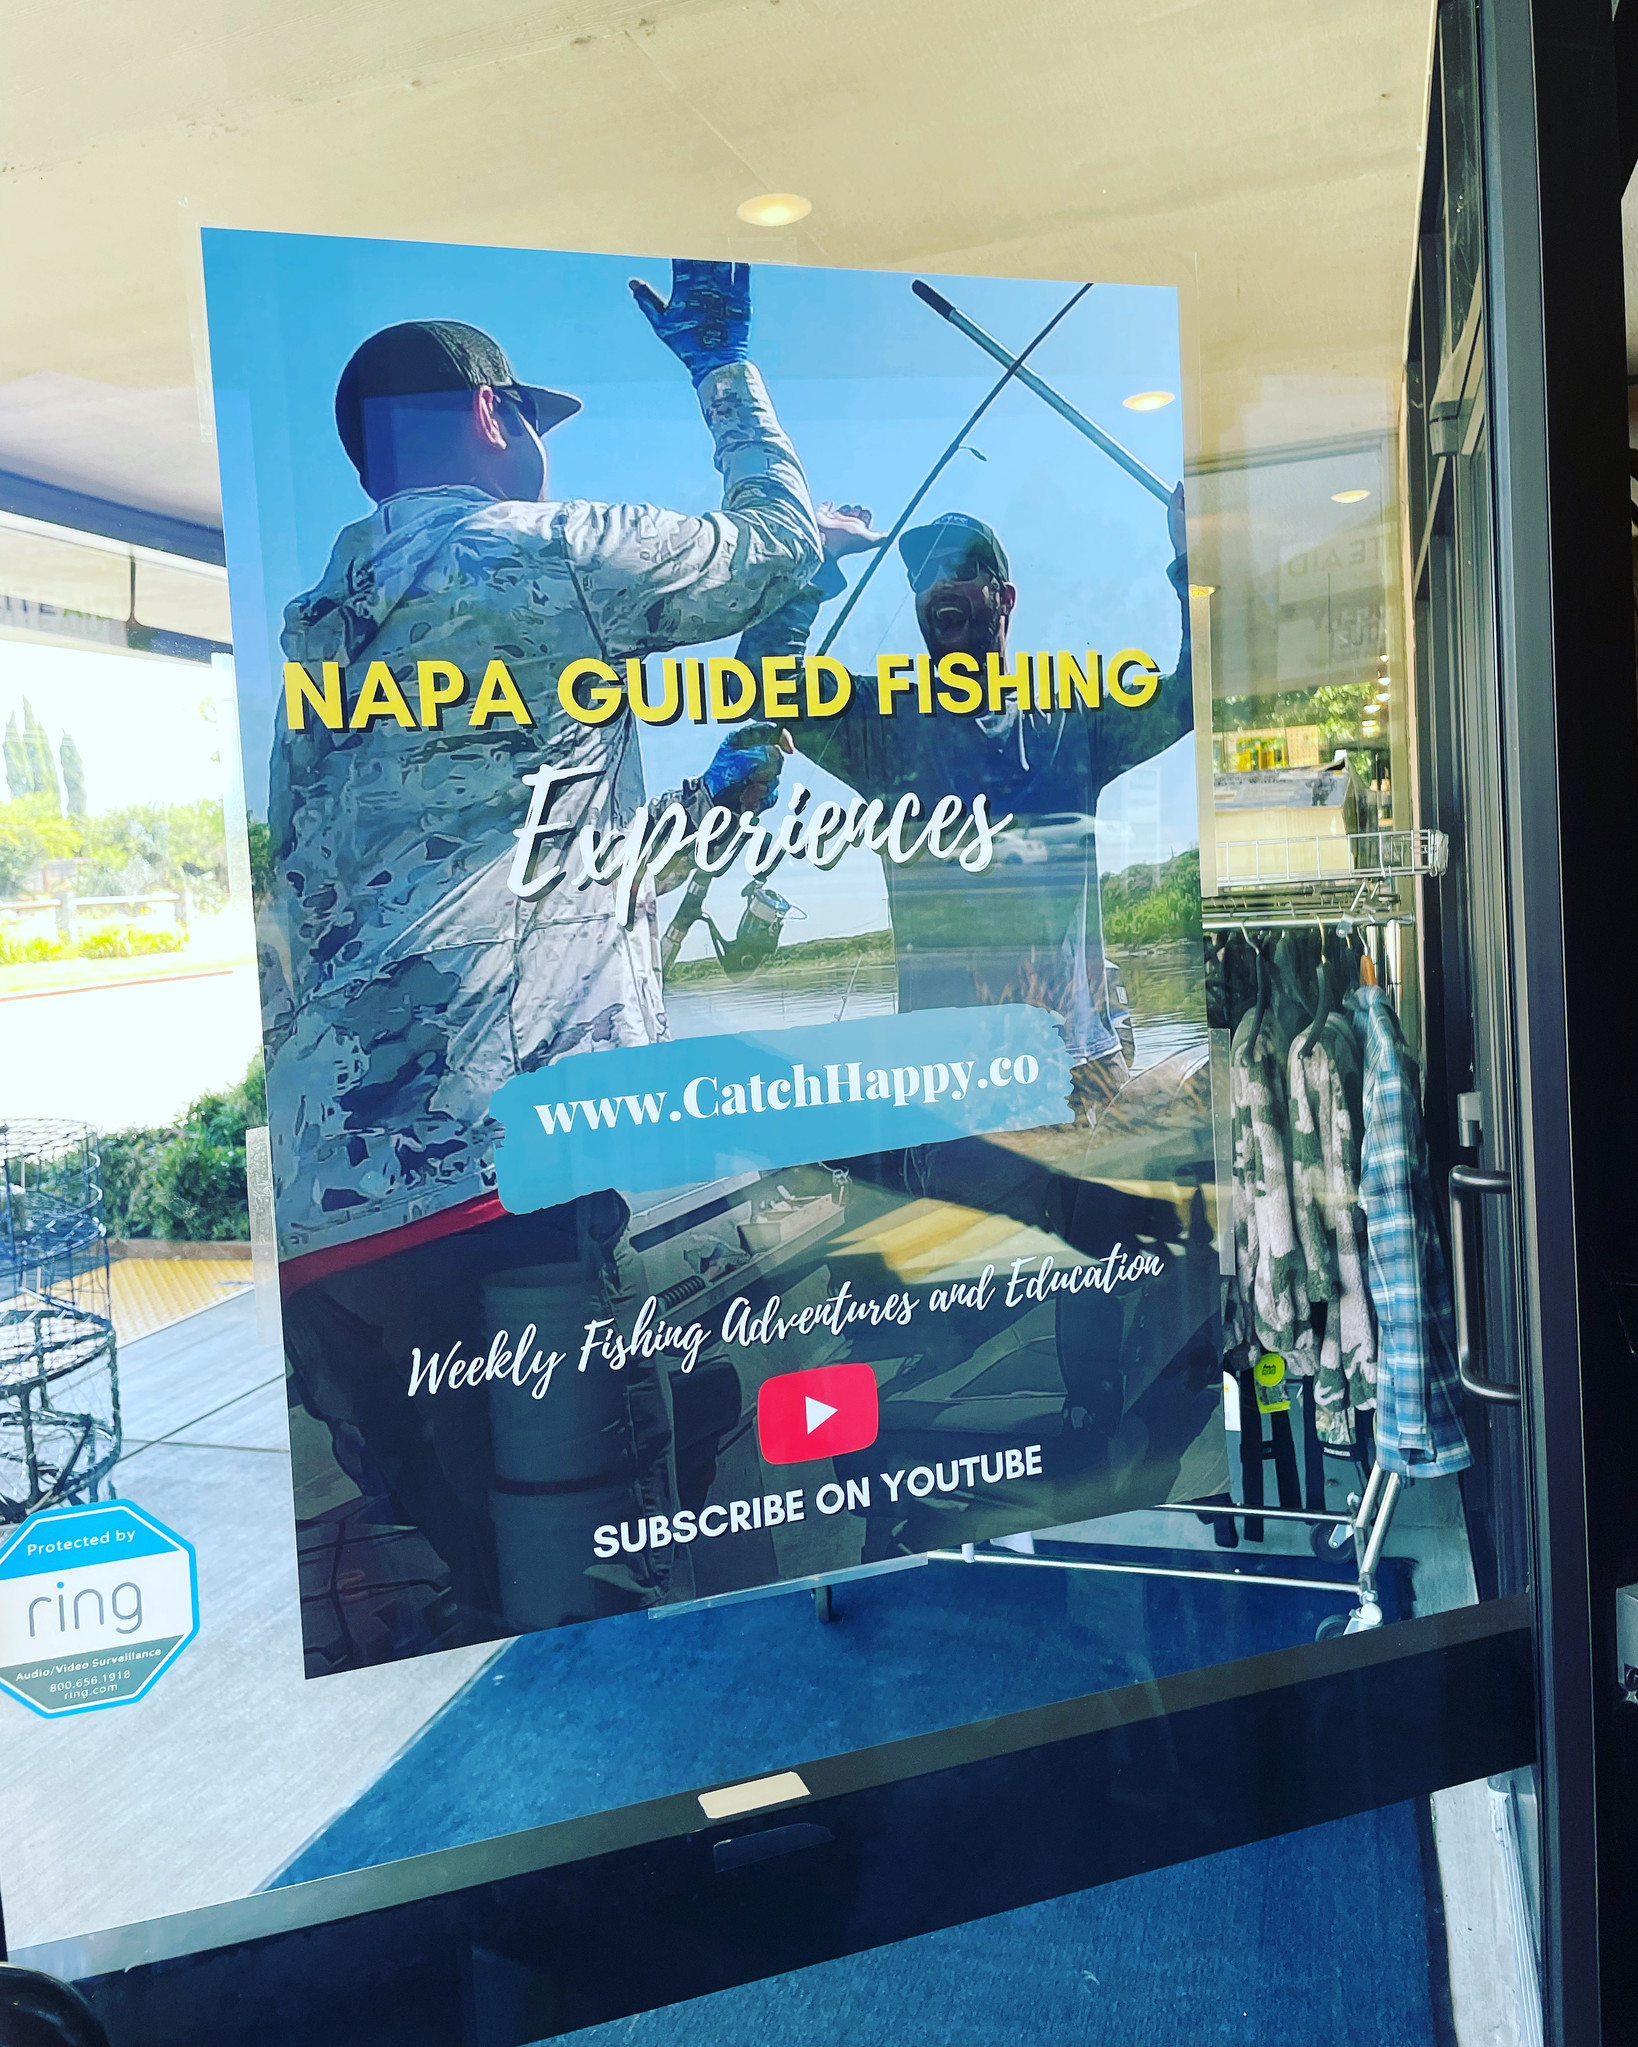 Why Sweeney's is launching CatchHappy.co, Napa's fishing guide website?